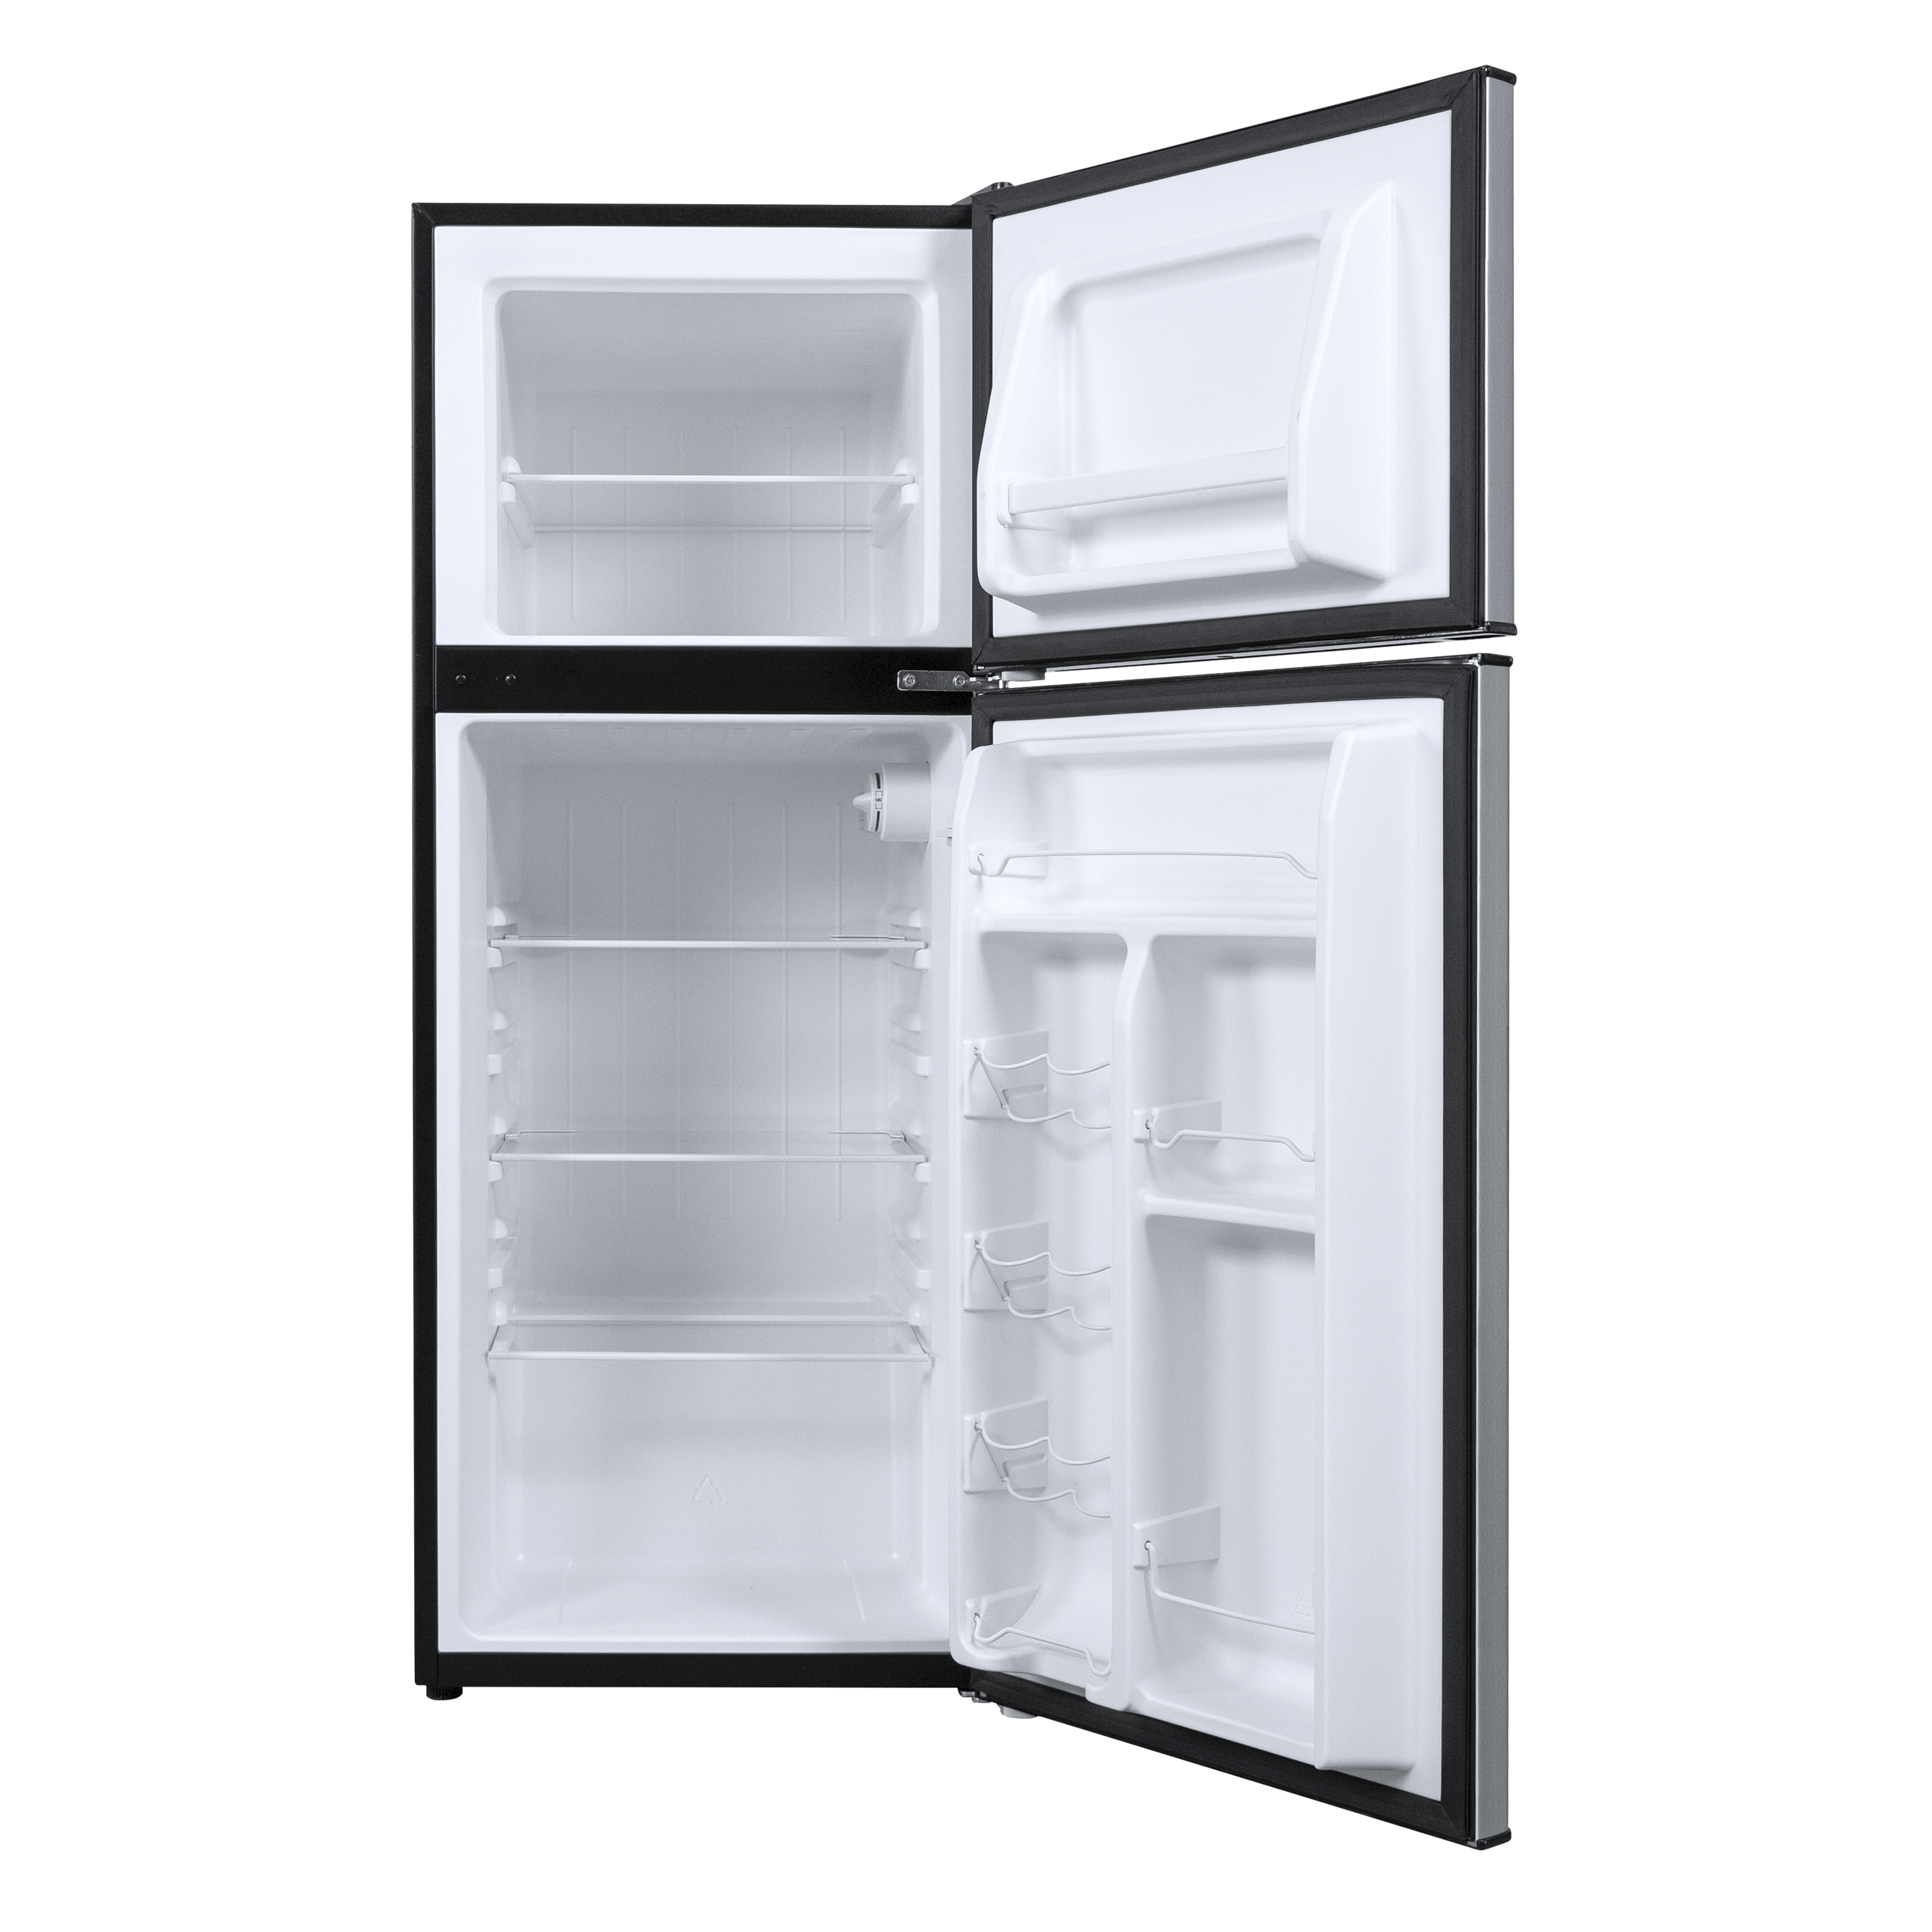 Galanz 4.6. Cu ft Two Door Mini Refrigerator with Freezer, Stainless Steel, New, Width 19.13" - image 4 of 11